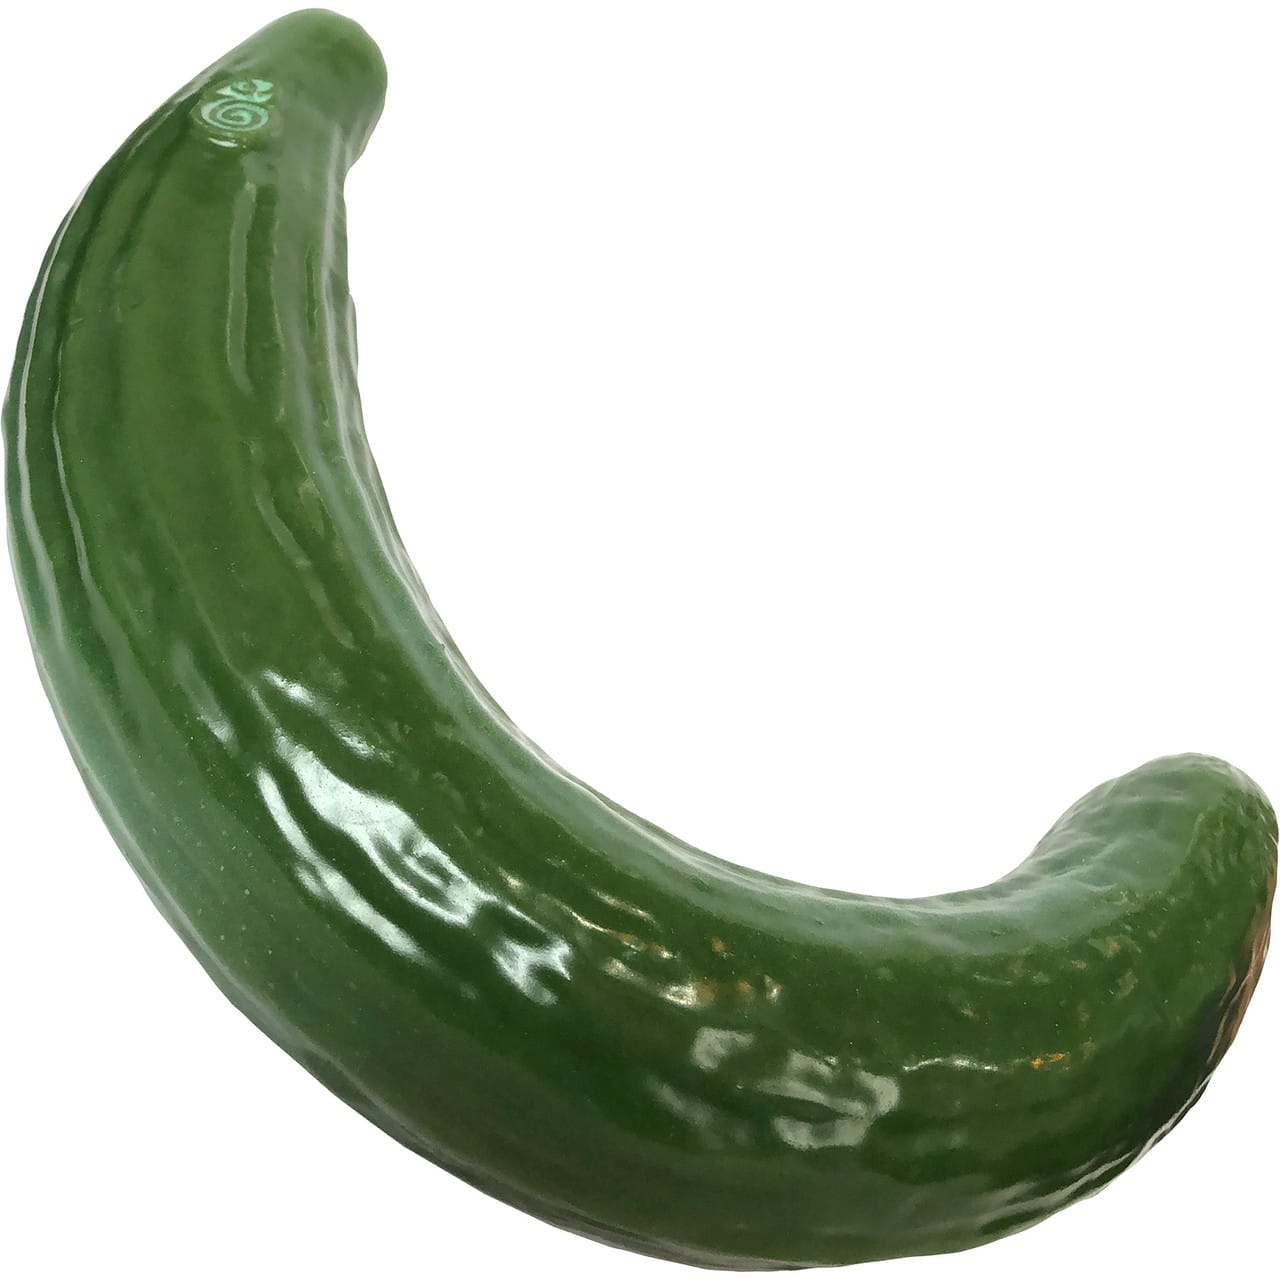 Product SelfDelve Curved Cucumber Dildo